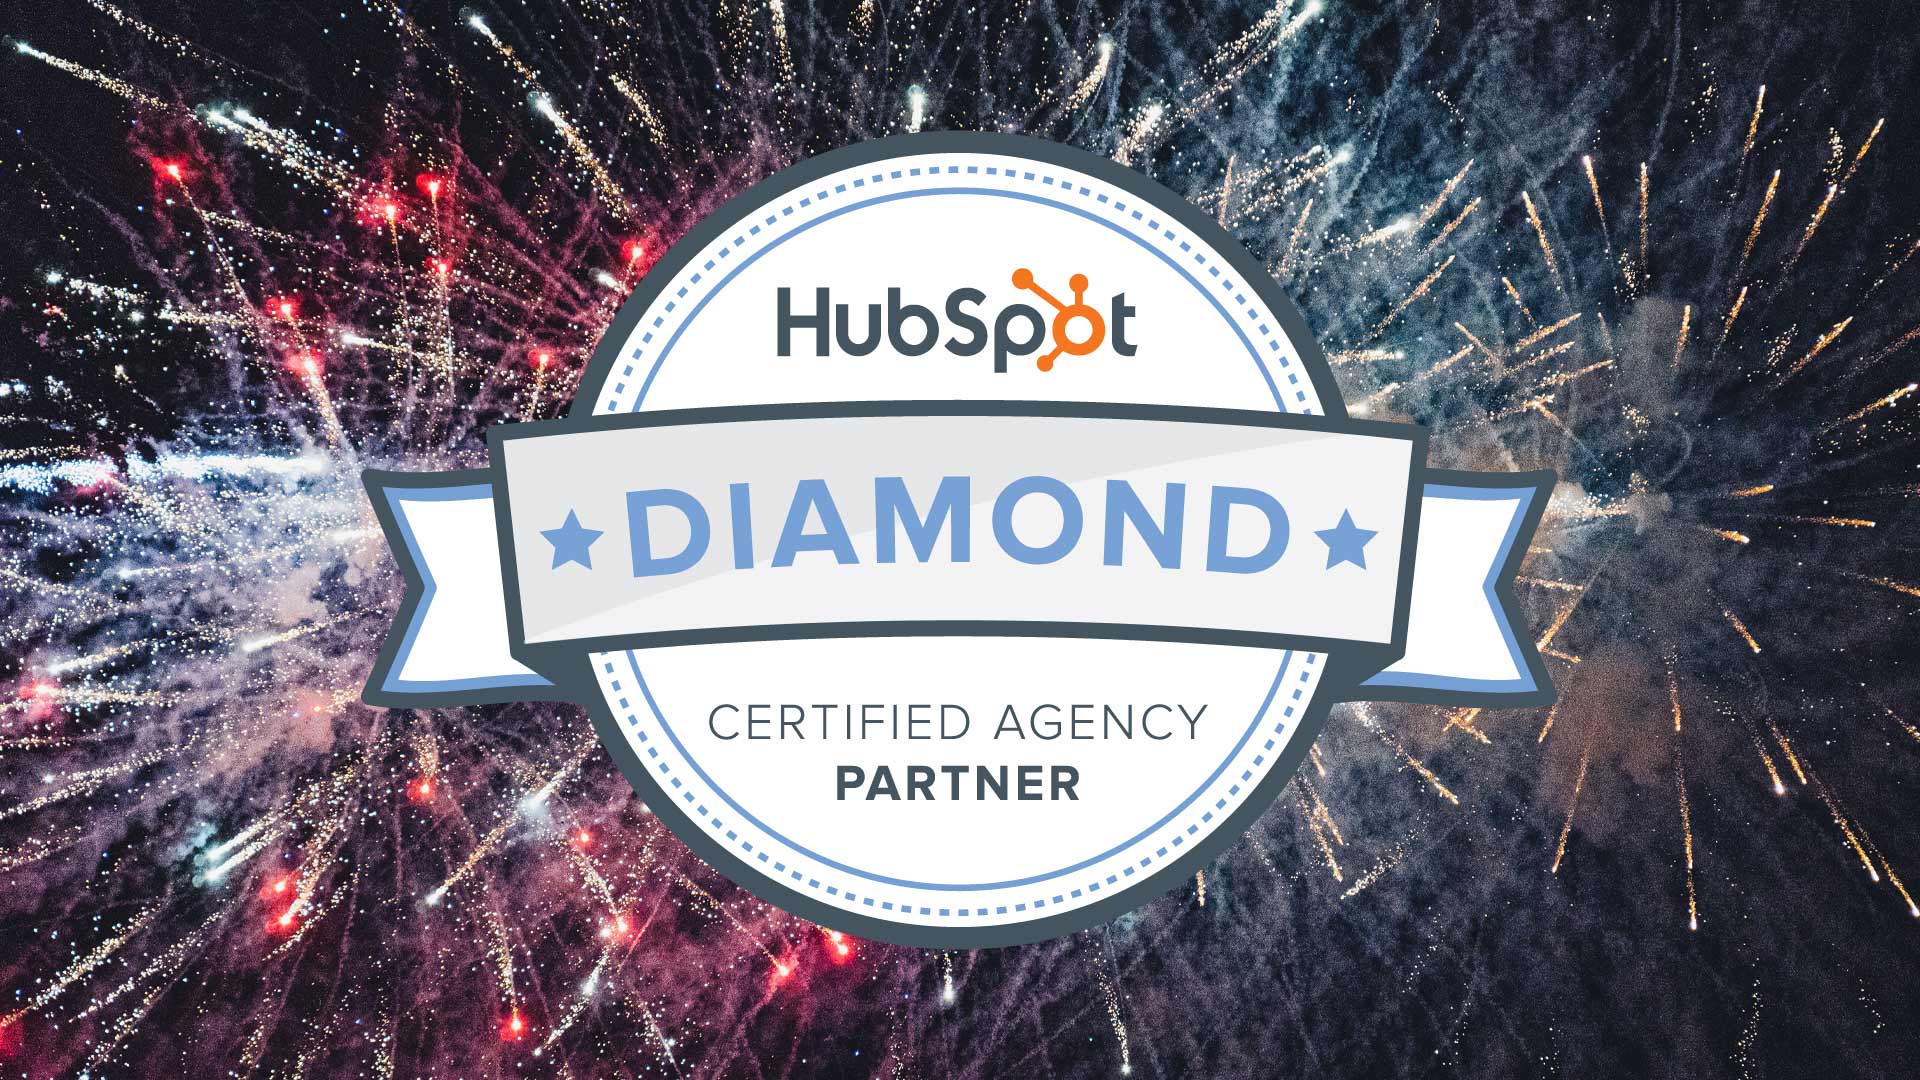 RevOps Automated achieves HubSpot Diamond Partner status in record time